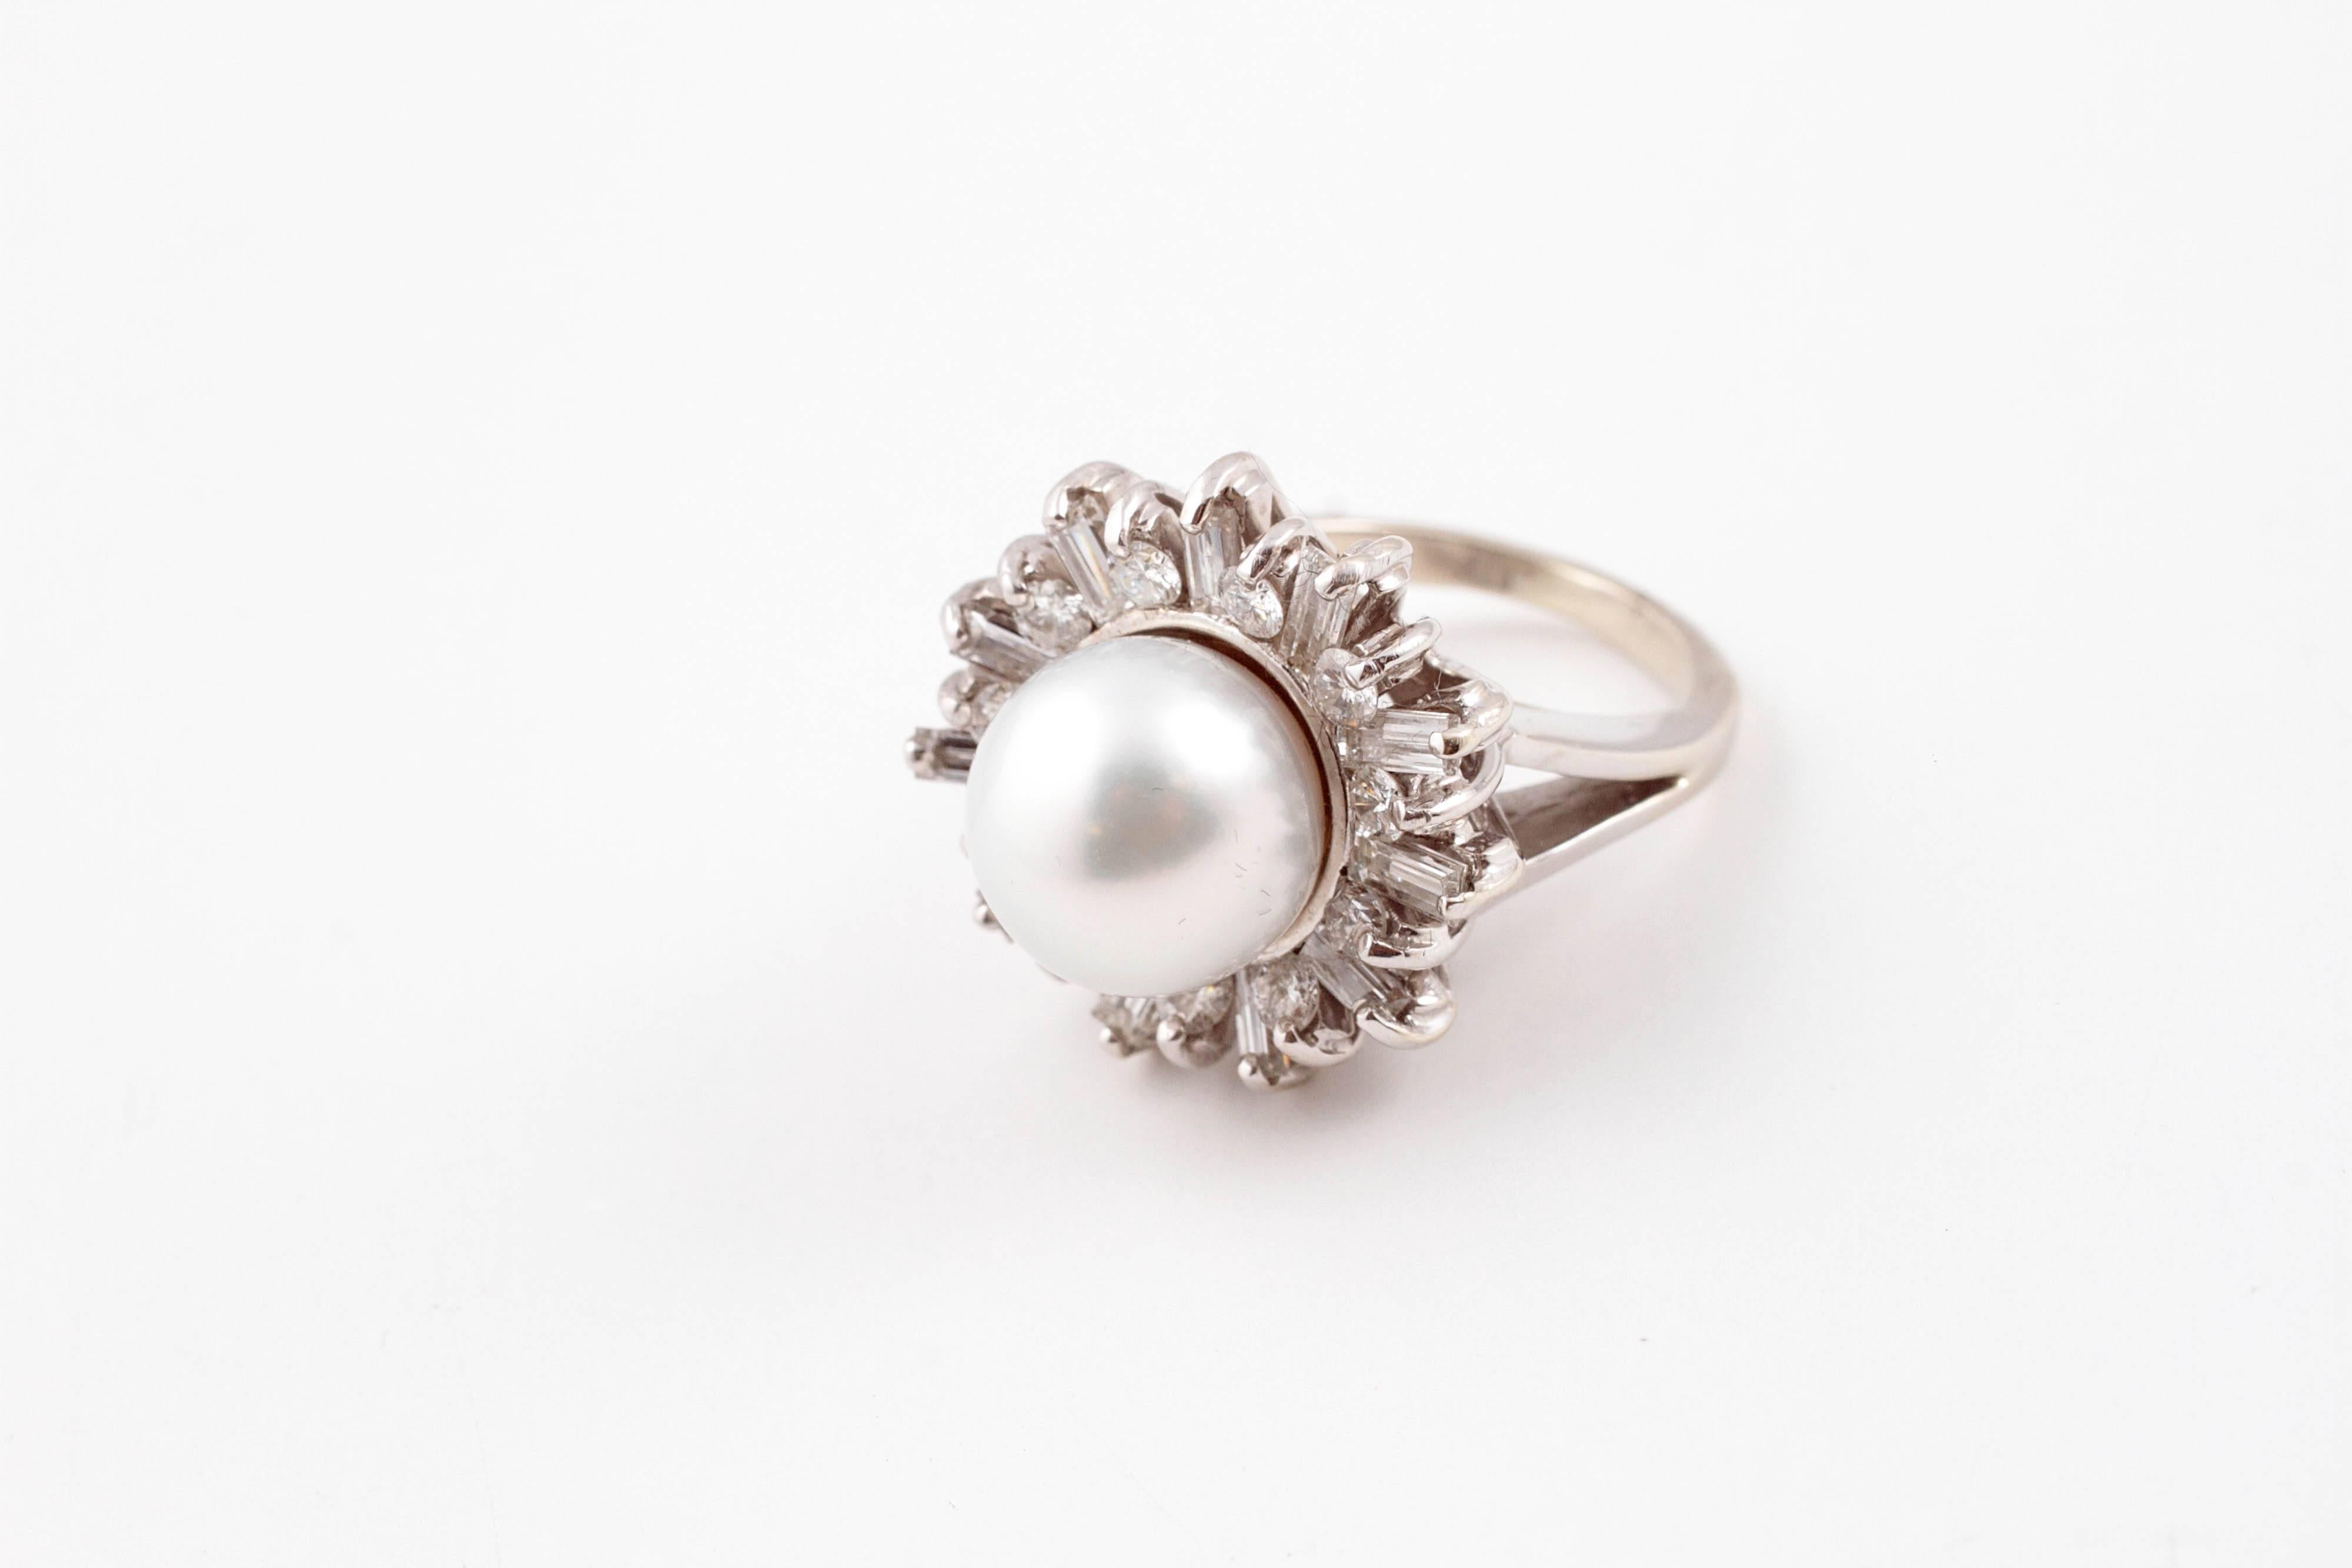 Lustrous 11.3 millimeter South Sea pearl with 1.60 carats of diamonds set in 14 karat white gold.  Size 6 1/4.